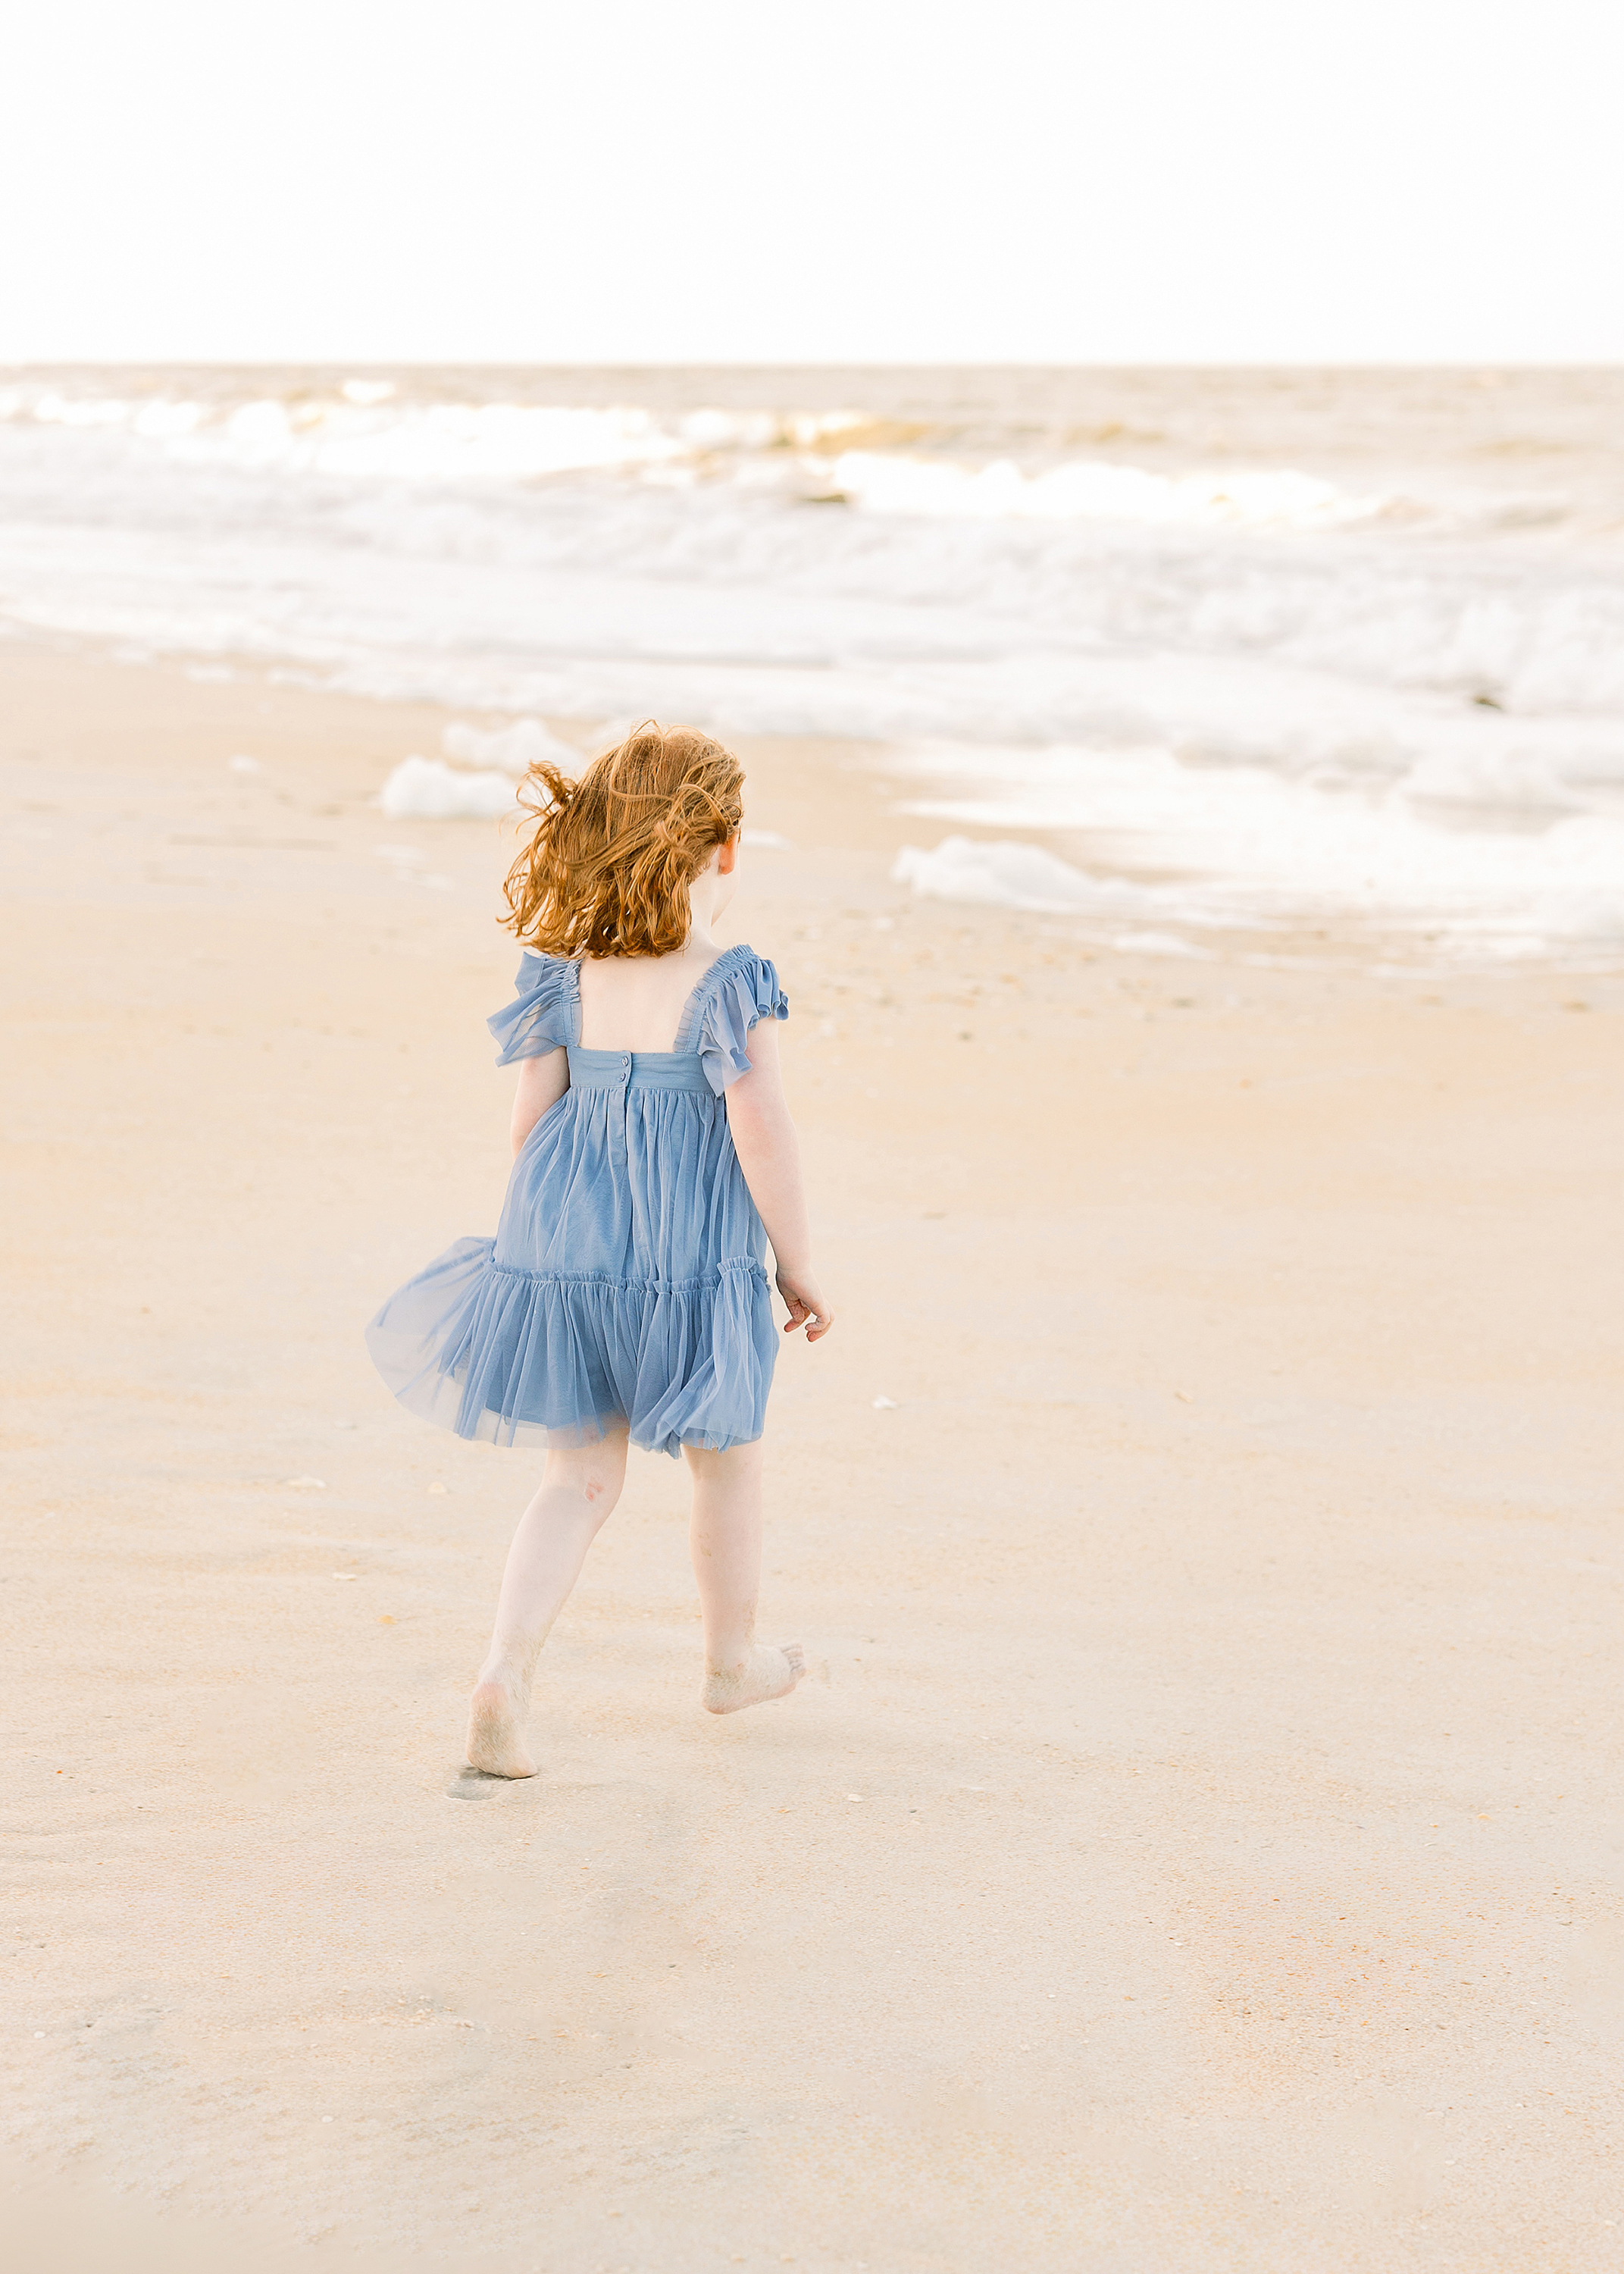 An ethereal childhood beach portrait of a little girl with red hair running towards the water.